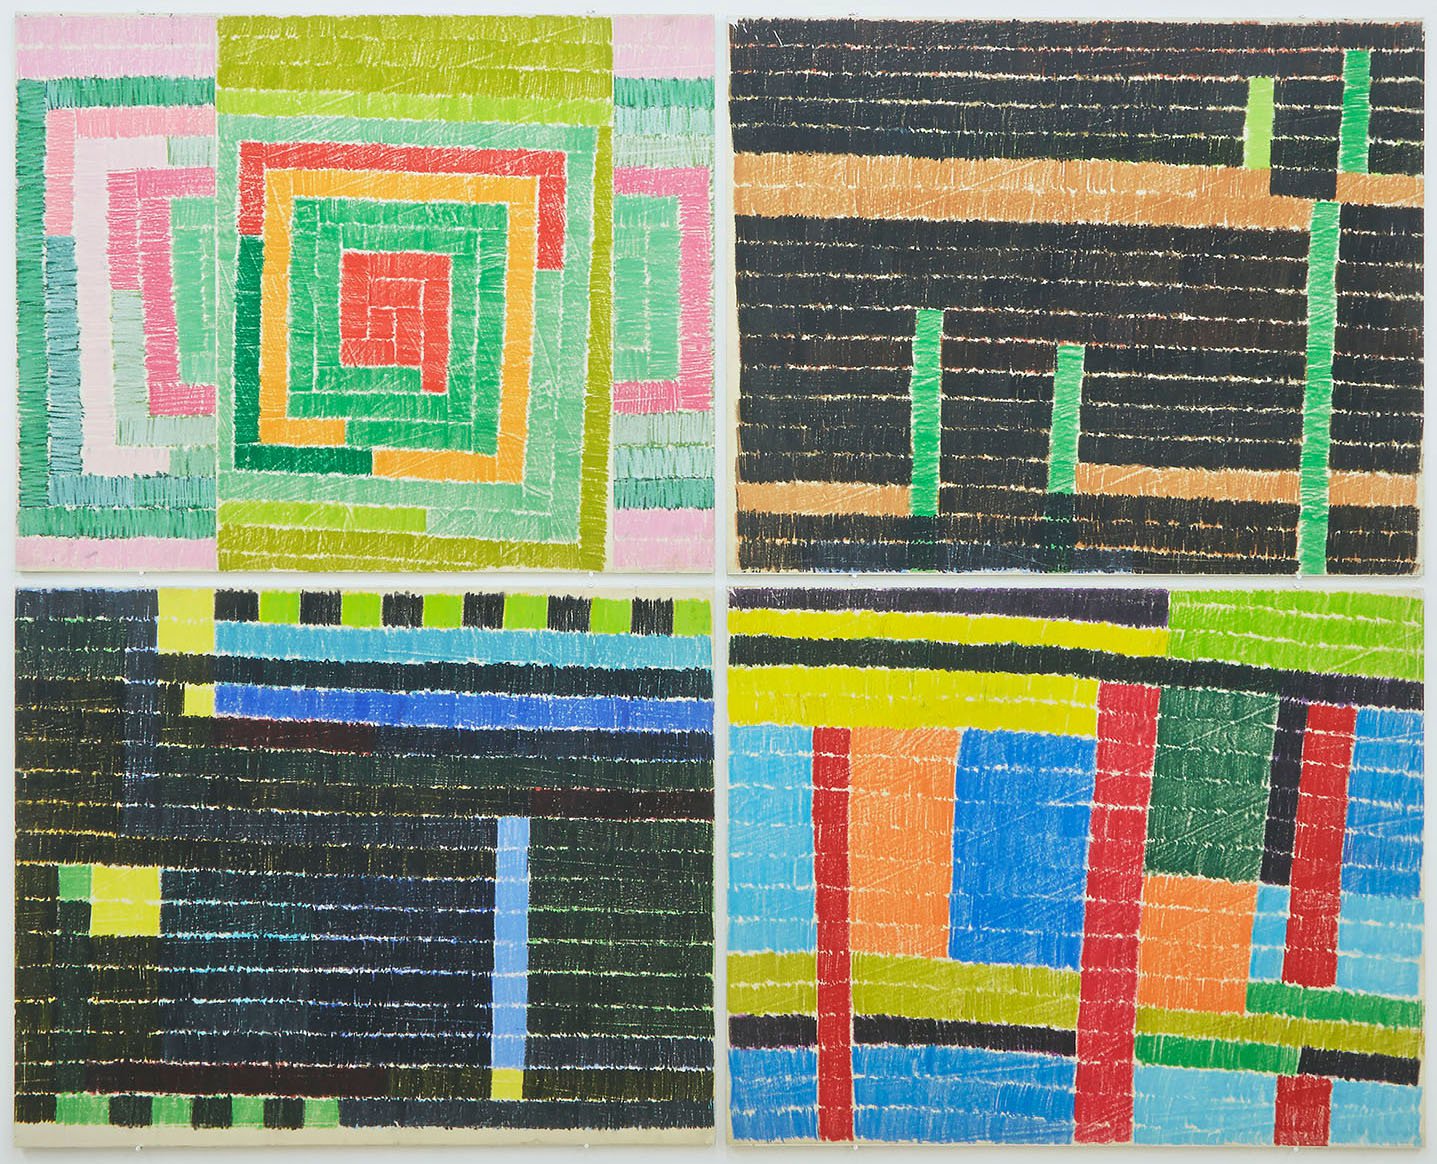 Lukas Duwenhögger, (L-R) Aztec; Gardens by Night; Oil Pits by Night; The Railway Bridge, oil pastels on paper mounted on wood, 89 x 112 cm each (35 x 44 1/8 in each), 1977